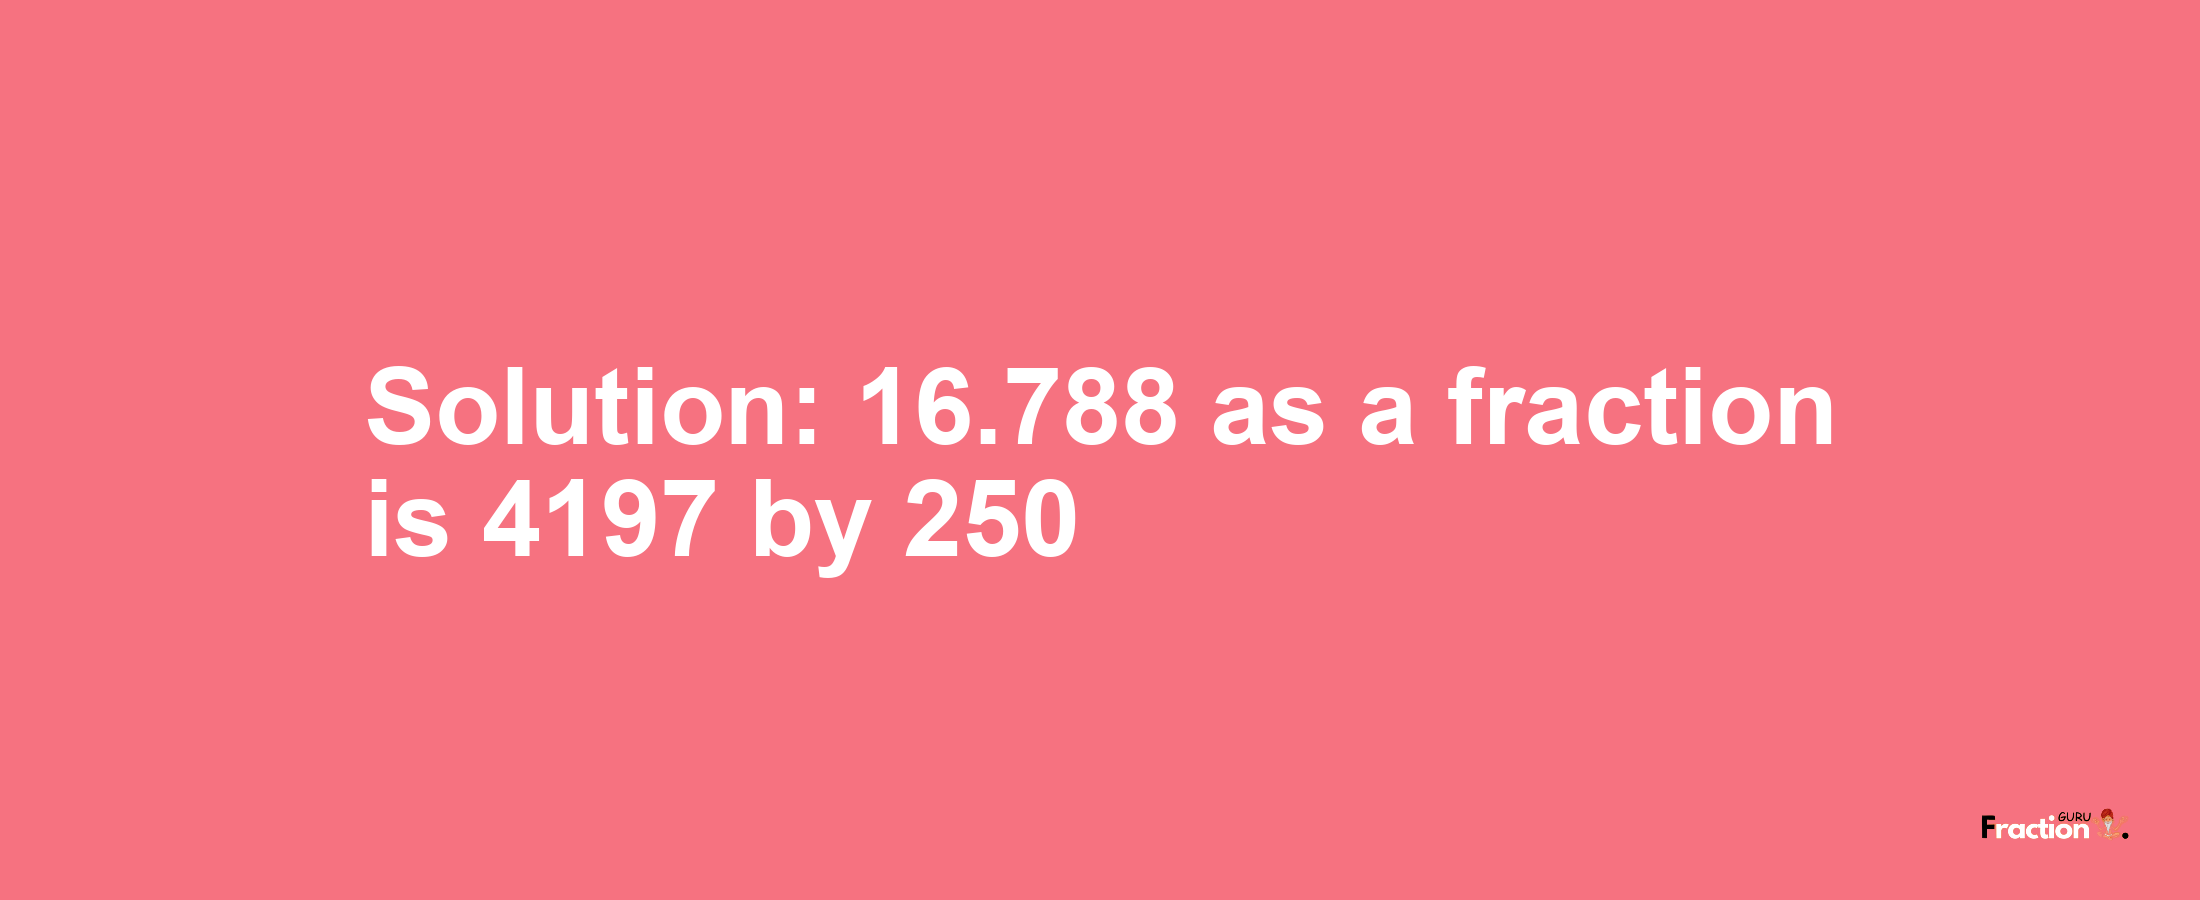 Solution:16.788 as a fraction is 4197/250